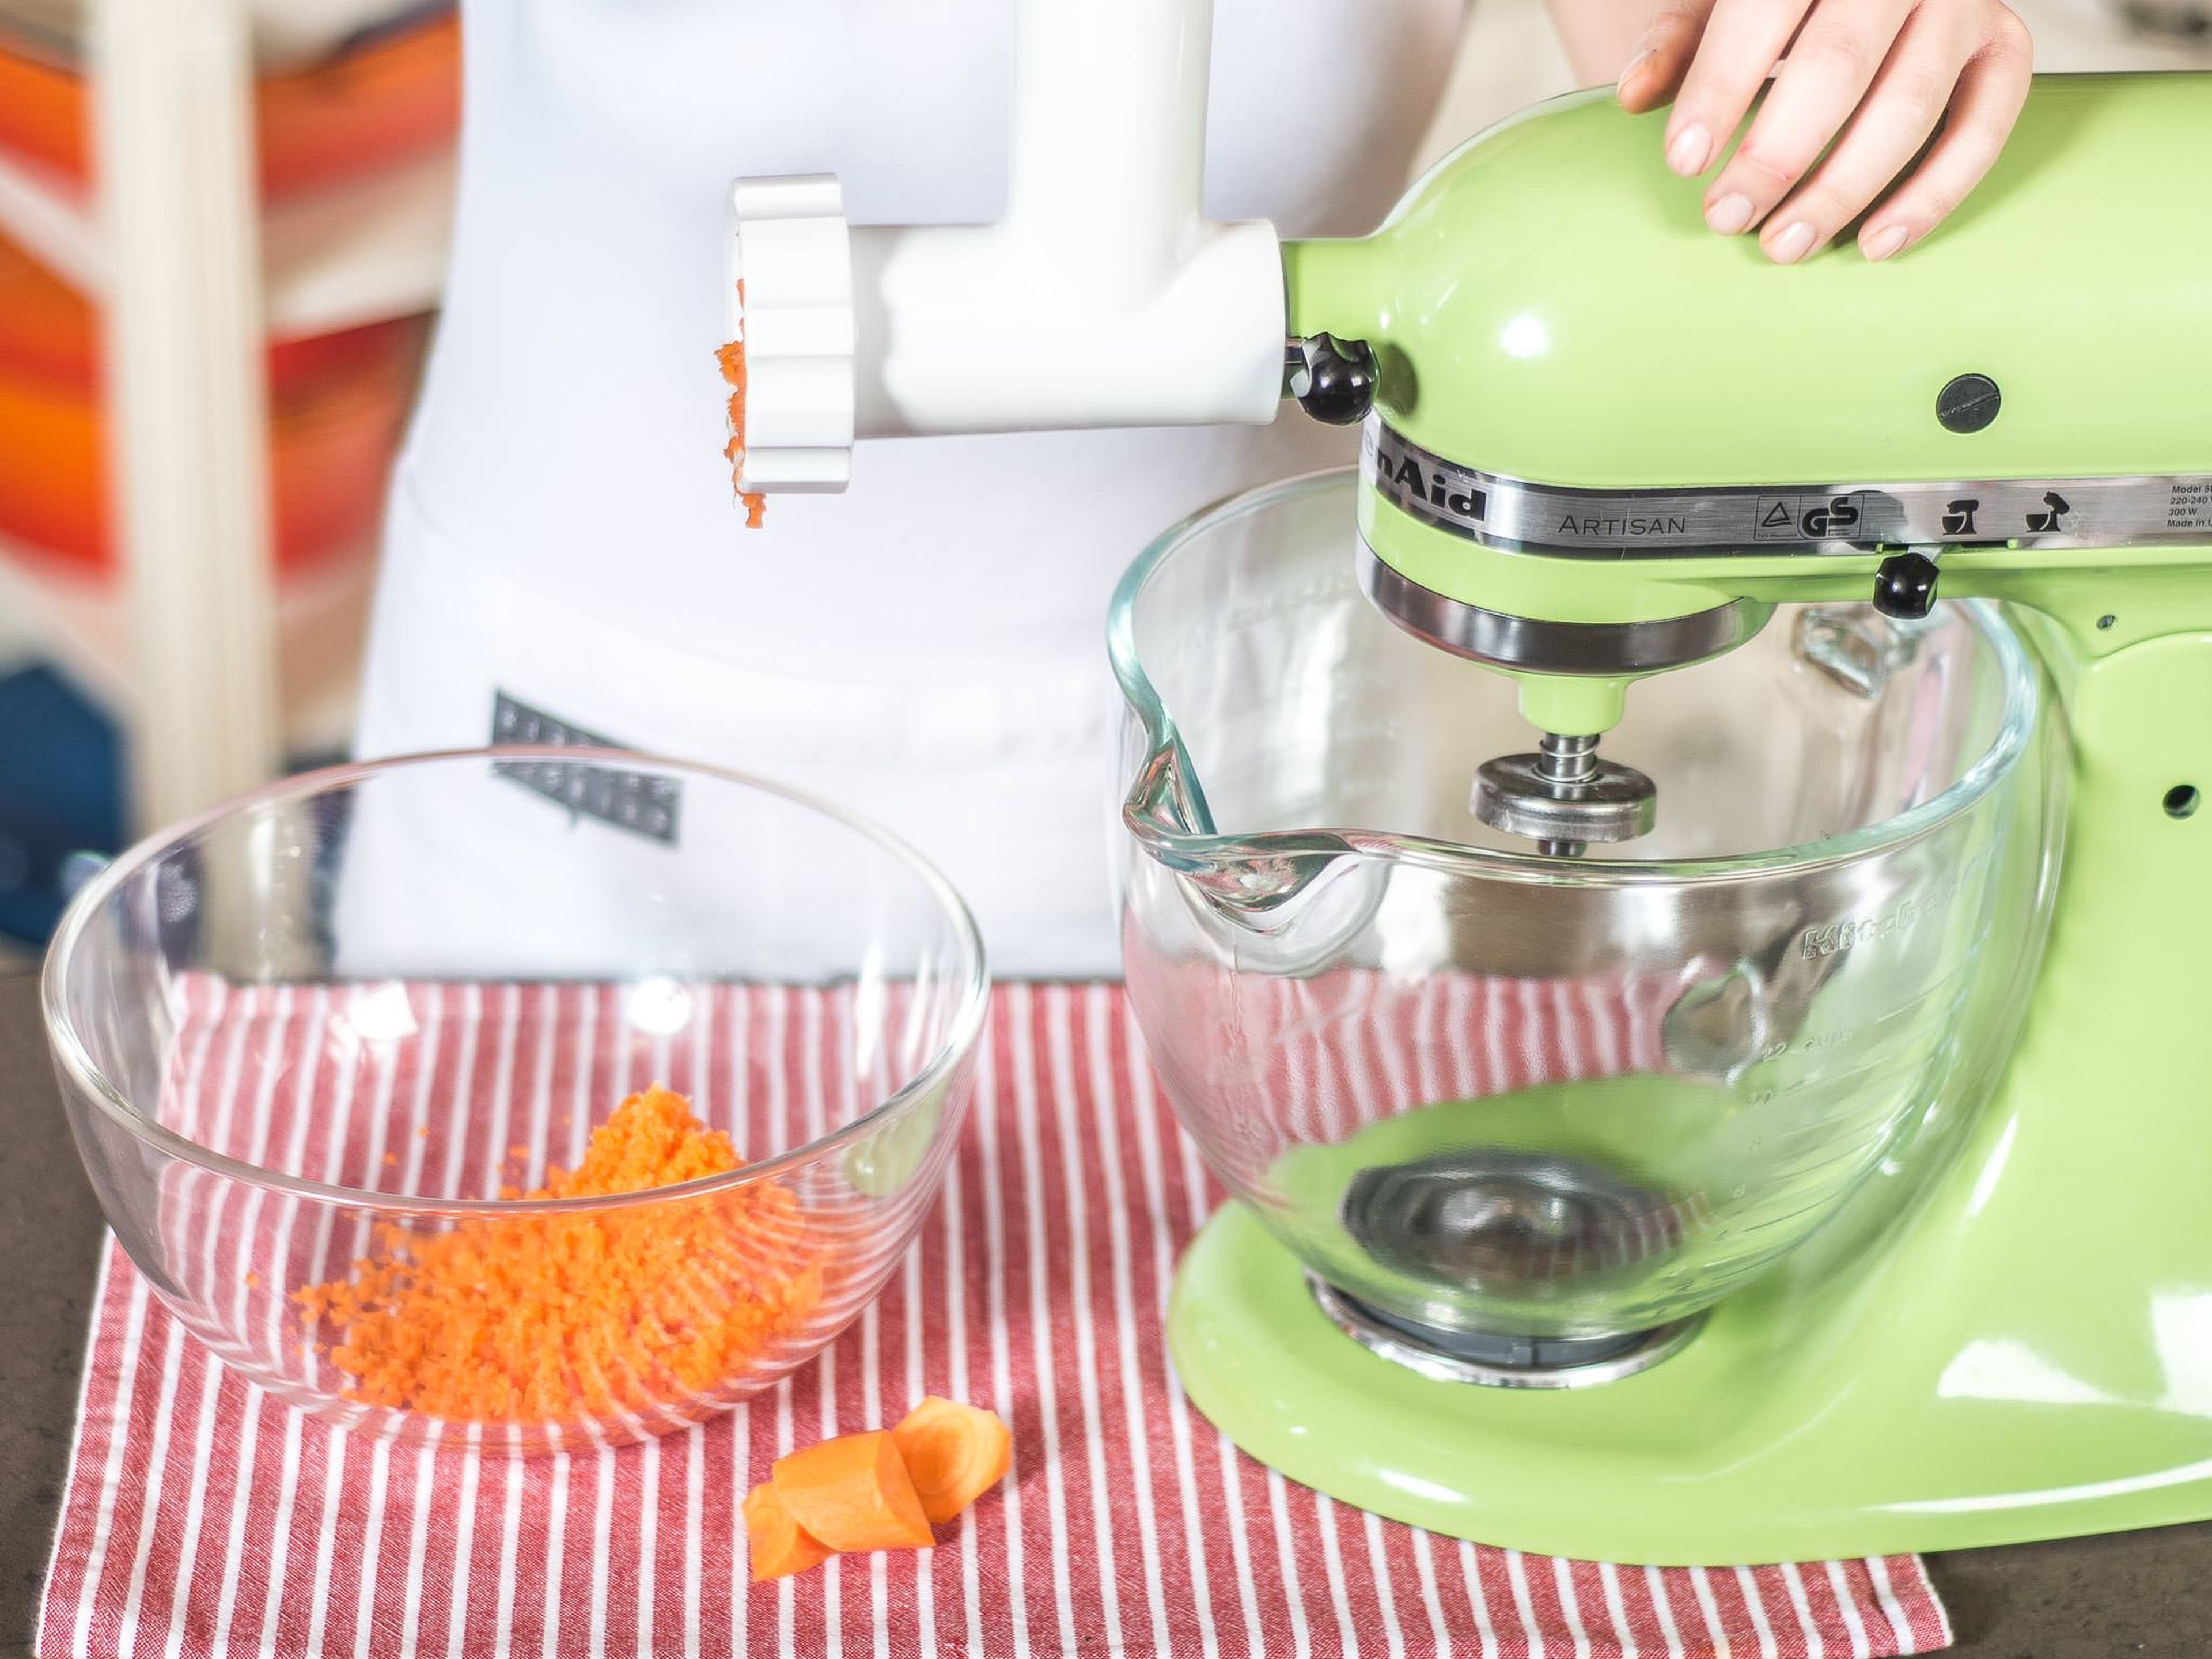 Peel the carrots, cut into walnut-sized pieces, and work into a rough paste with the food processor.